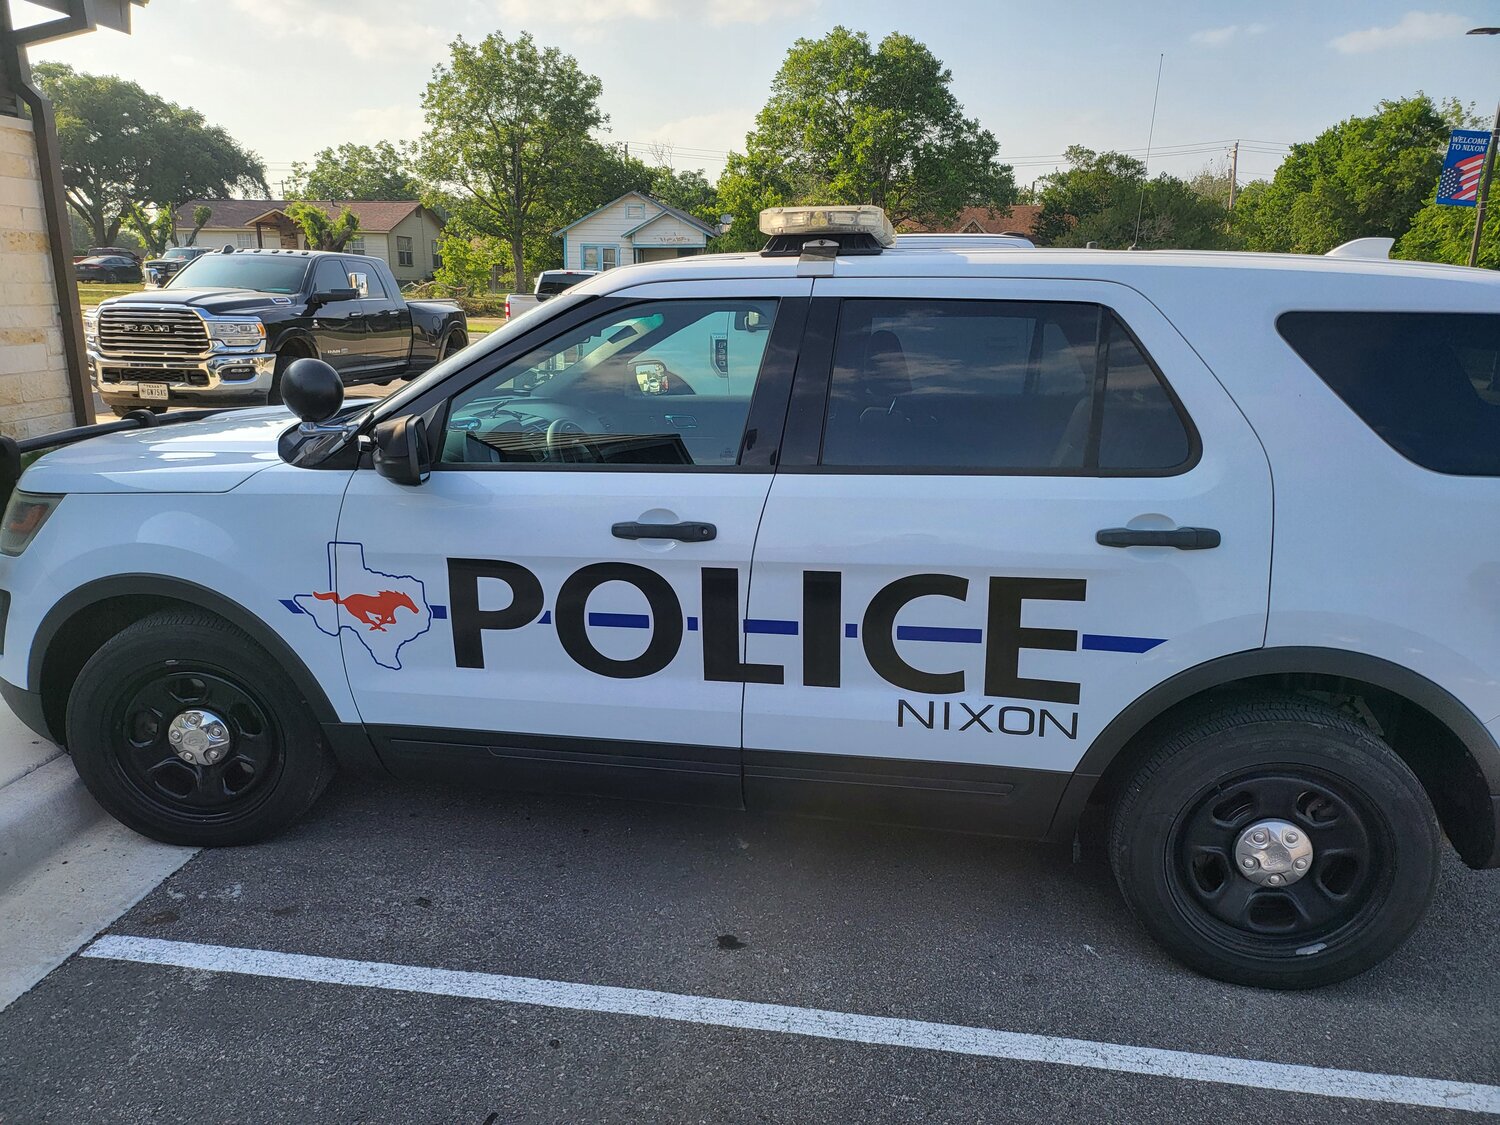 Nixon Police Department unveiled a new logo on a patrol vehicle on Monday, May 20.